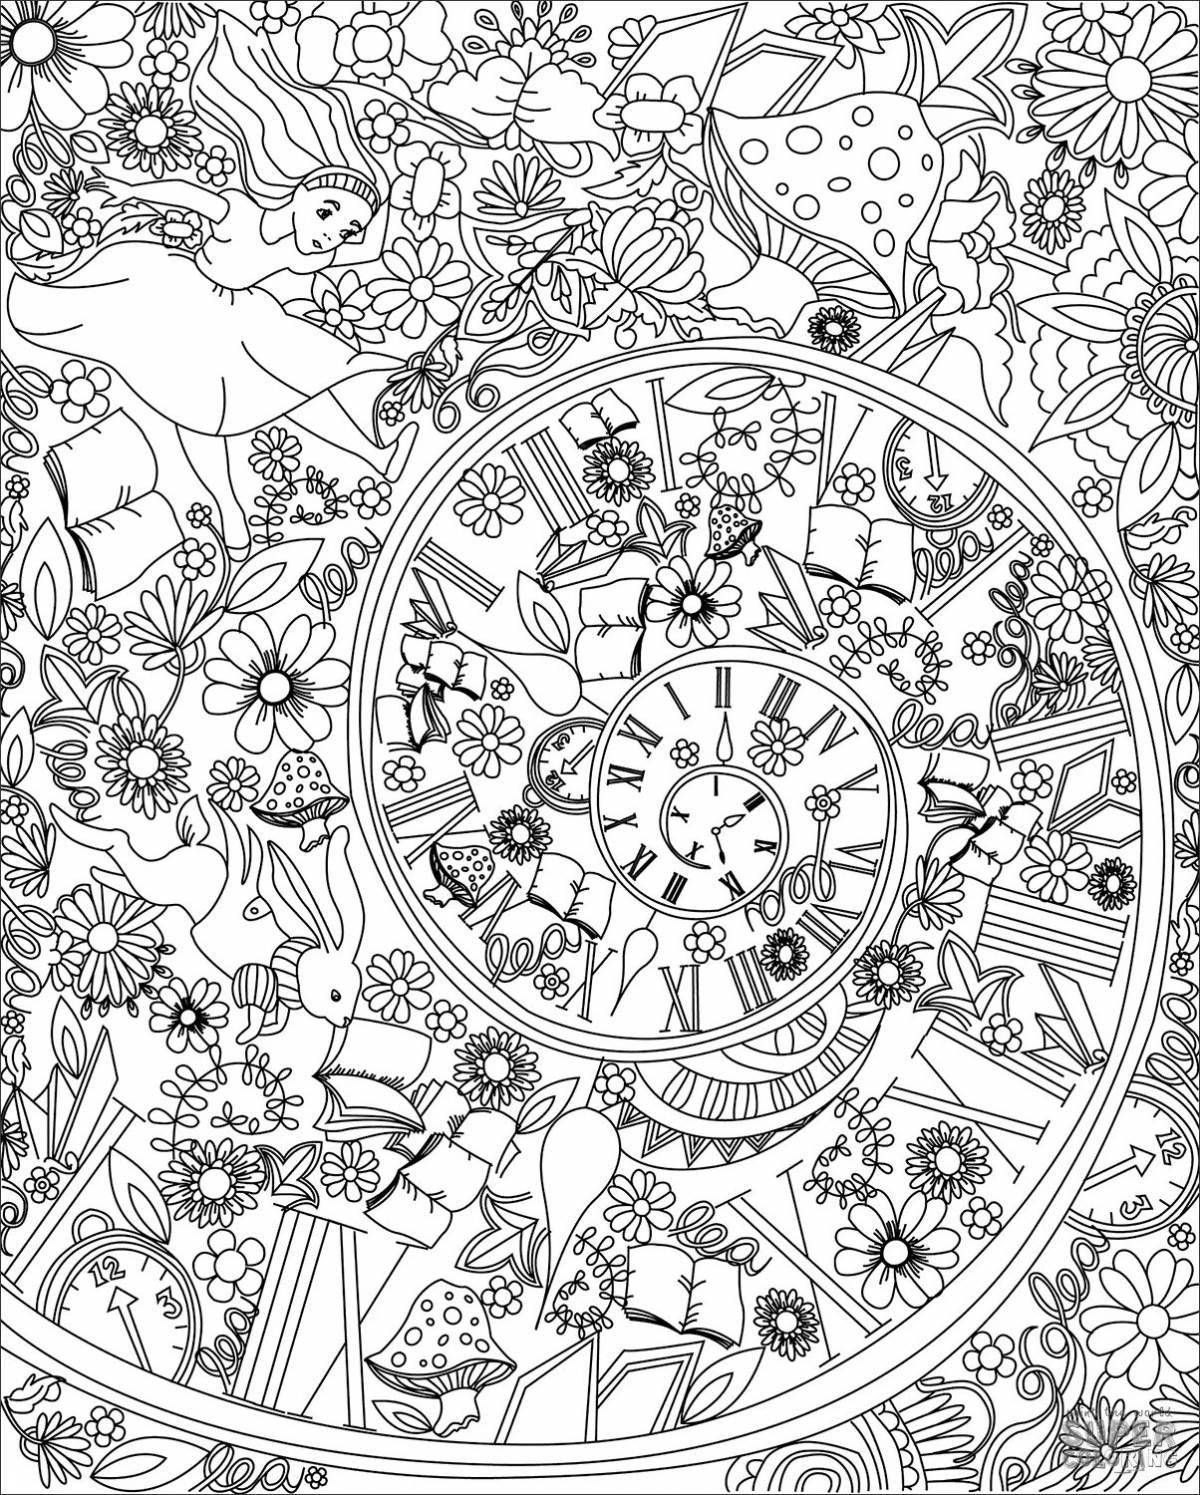 Detailed adult coloring book, large